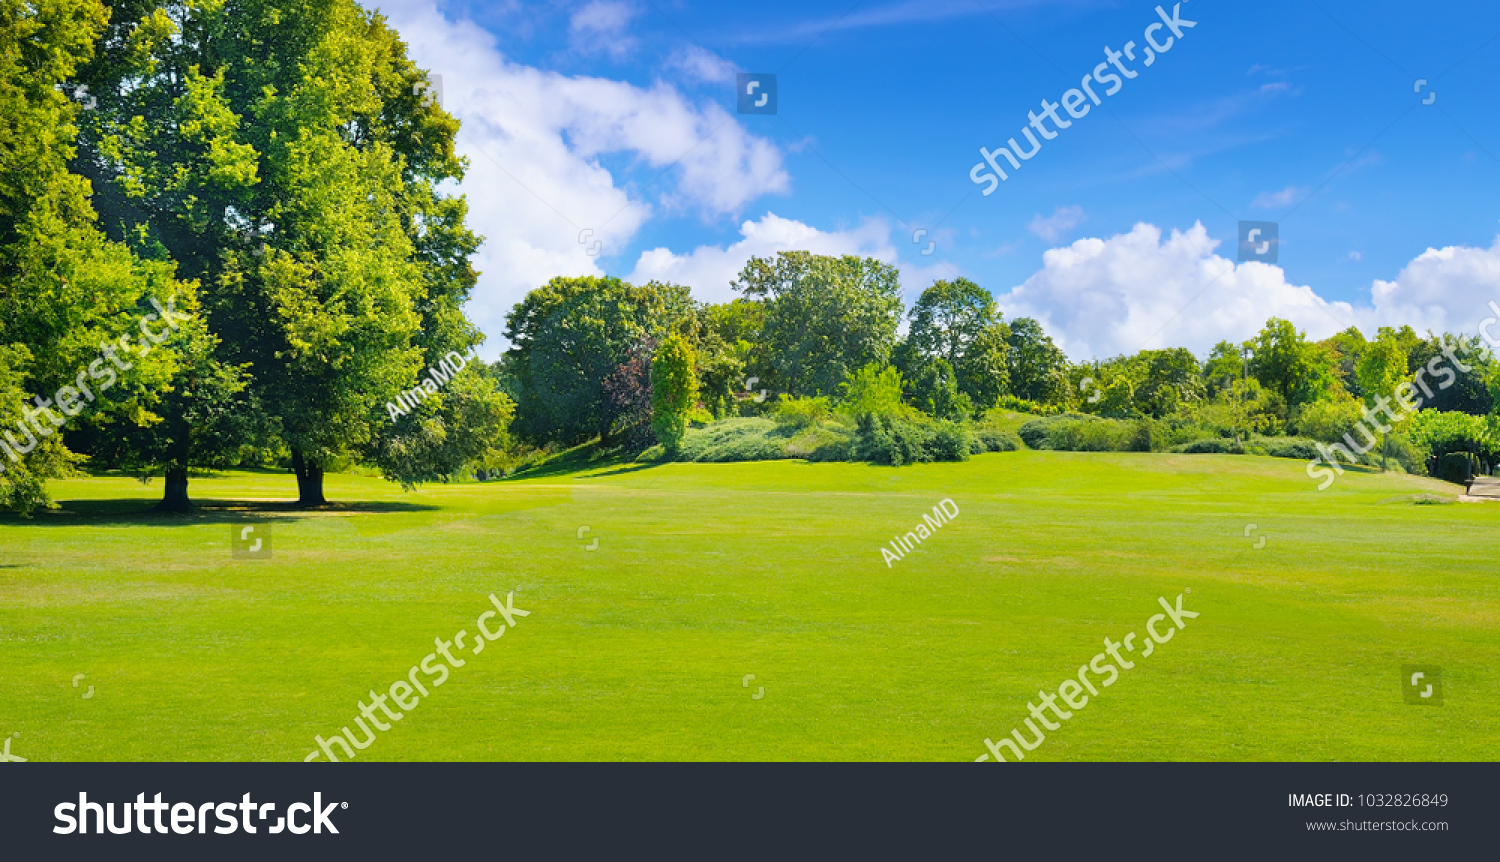 Summer park with deciduous trees and broad lawns. In the blue sky, light cumulus clouds. Wide photo. #1032826849